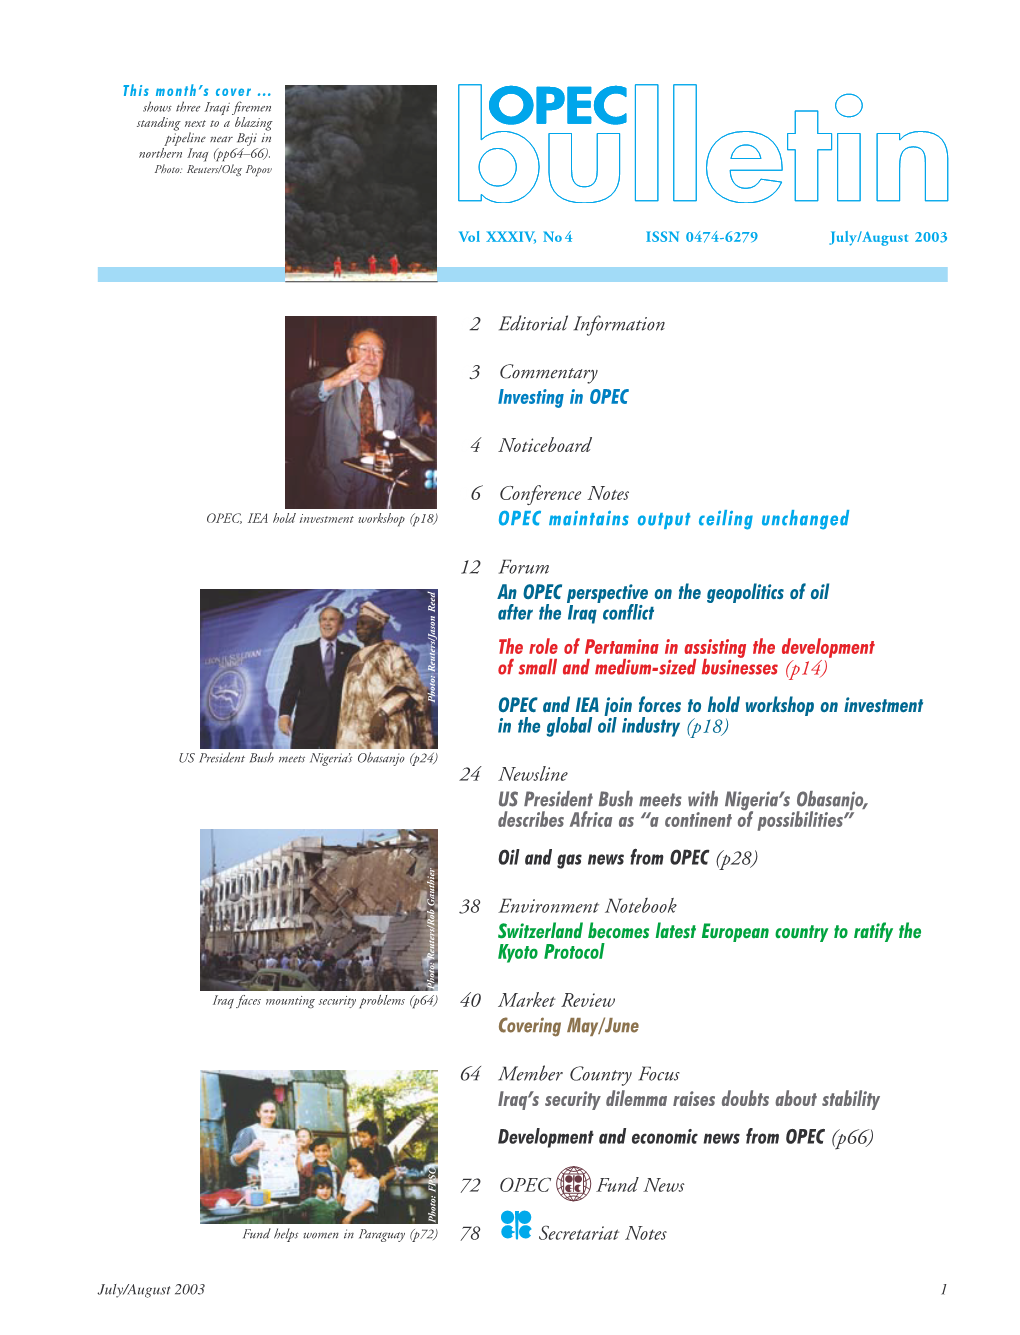 02 Editorial Information 03 Commentary Investing in OPEC 04